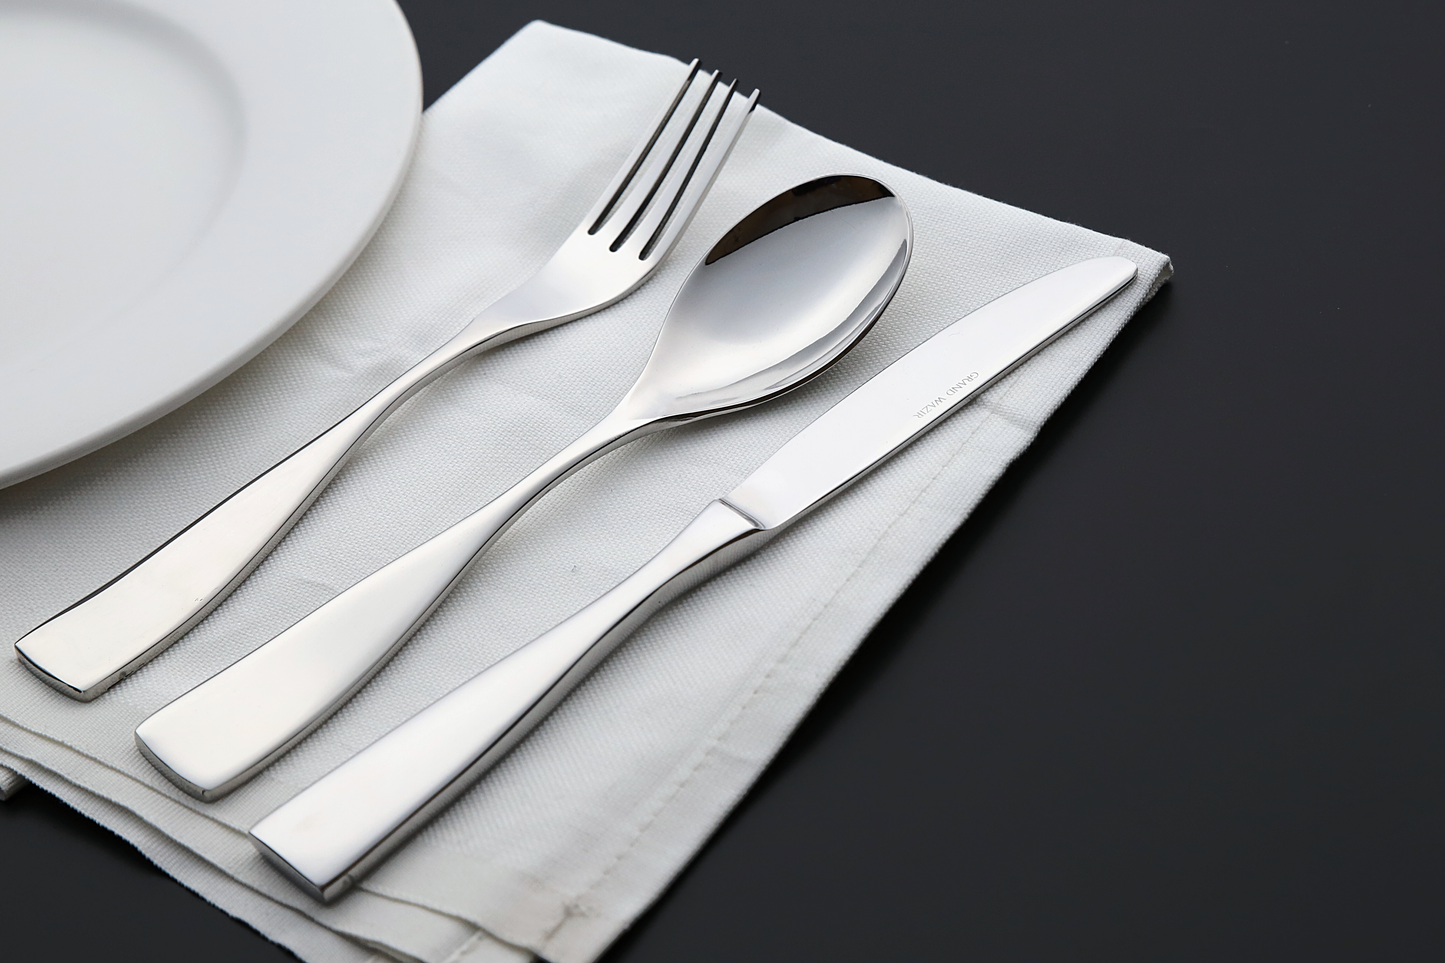 Artisan 4 Gauge Set: A Touch of Luxury at Every Meal